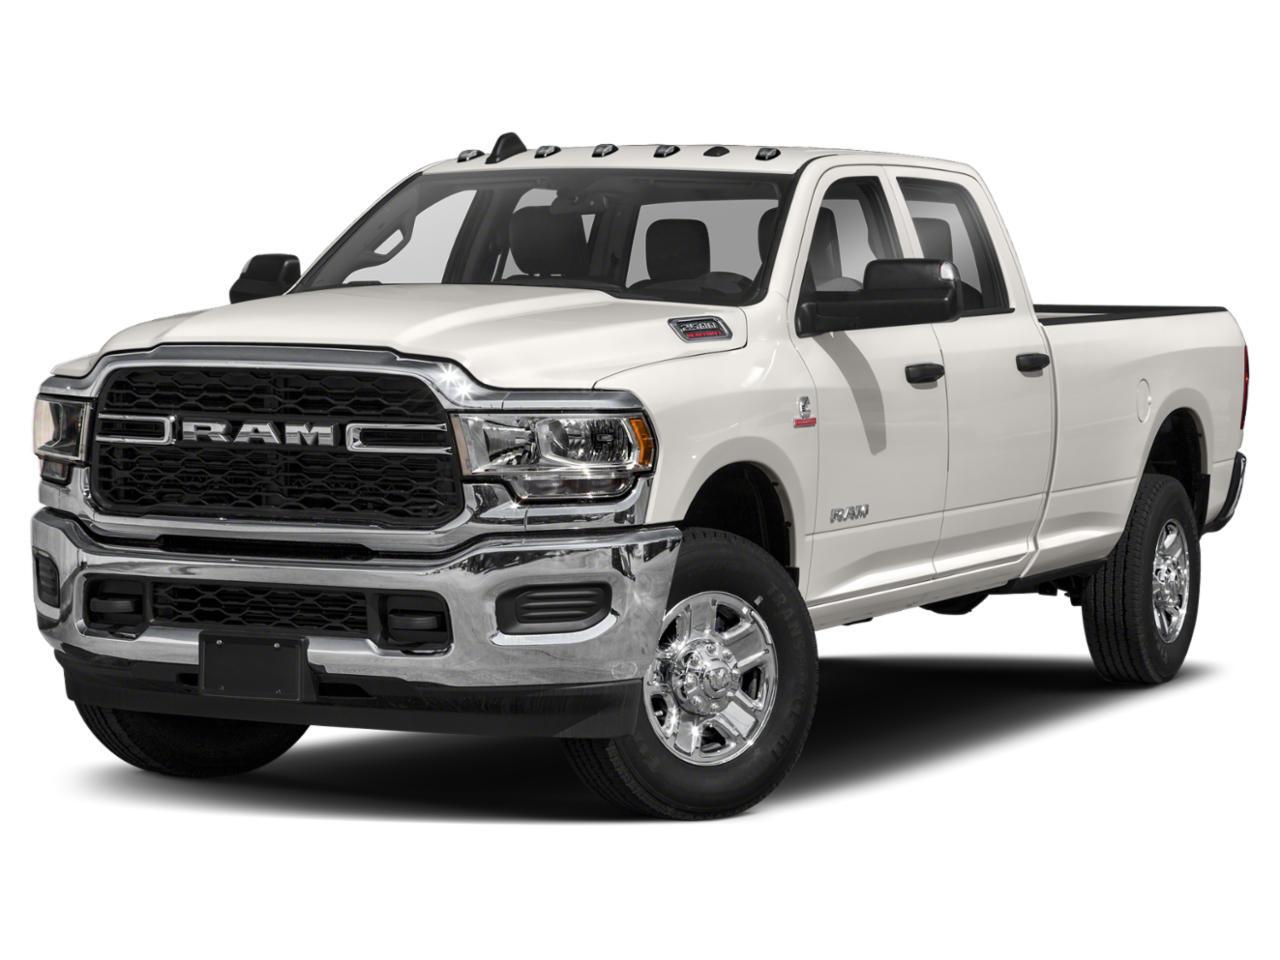 2020 Ram 2500 LONGHORN | SAFETY GROUP | RAMBOXES | POWER SUNROOF